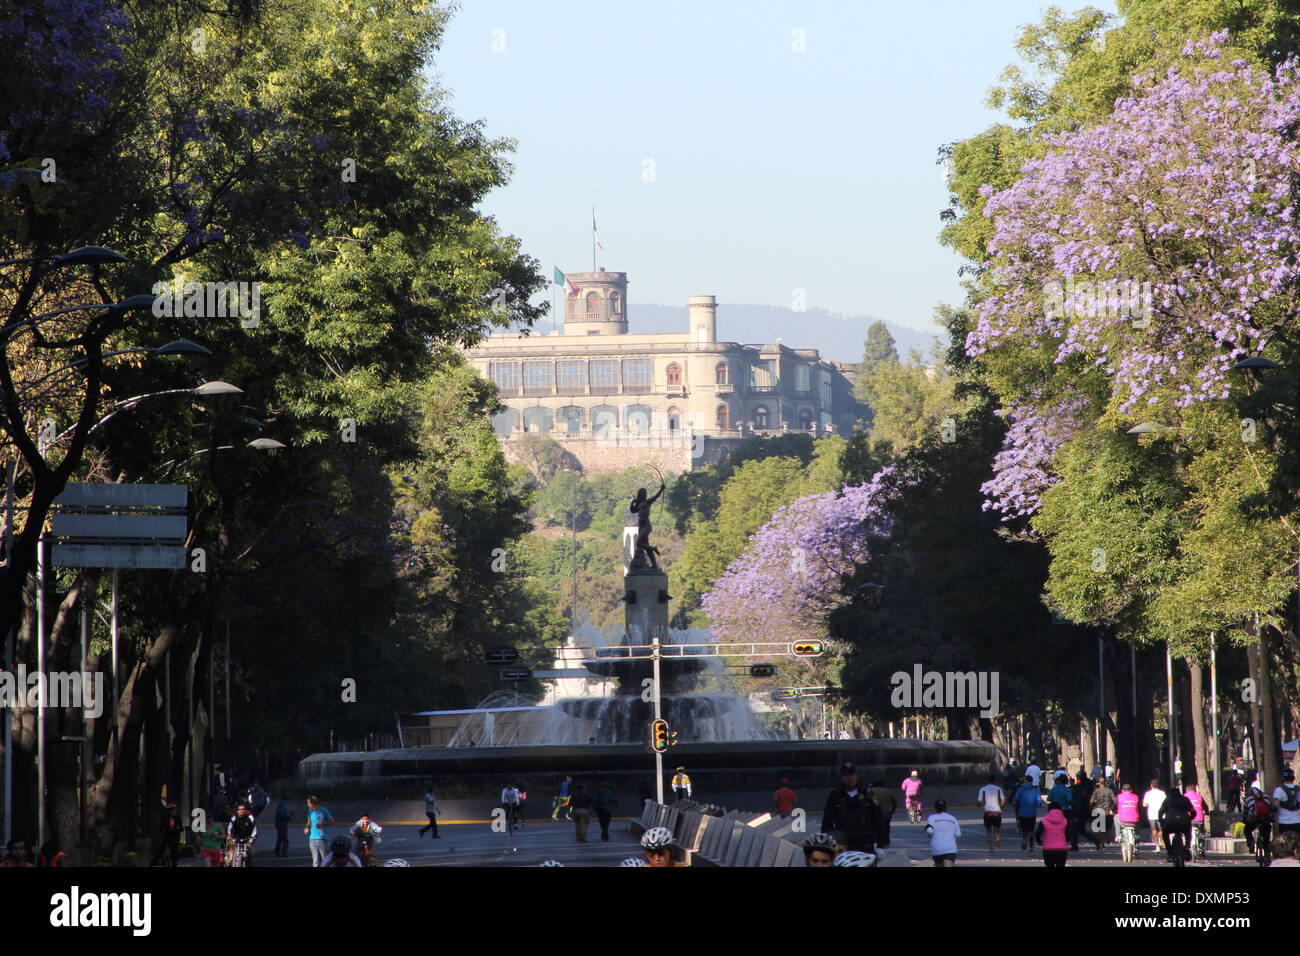 Looking down at the Castle of Chapultepec and statue of La Diana along Paseo de la Reforma, Mexico City Stock Photo